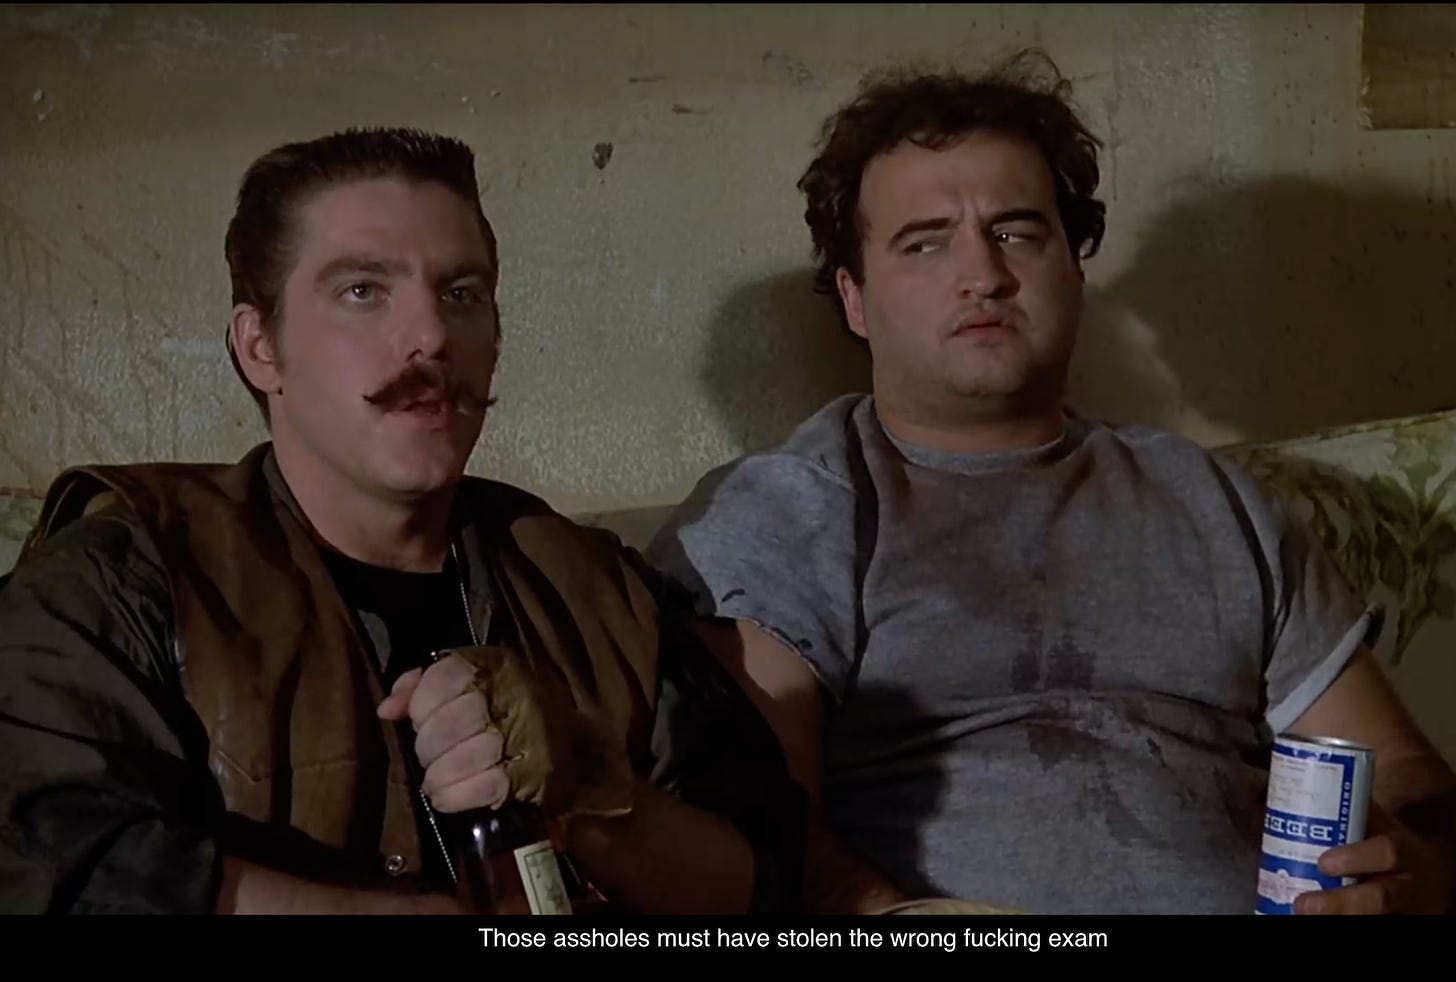 Still from Animal House with John Belushi and the line: "Those assholes must have stolen the wrong fucking exam."